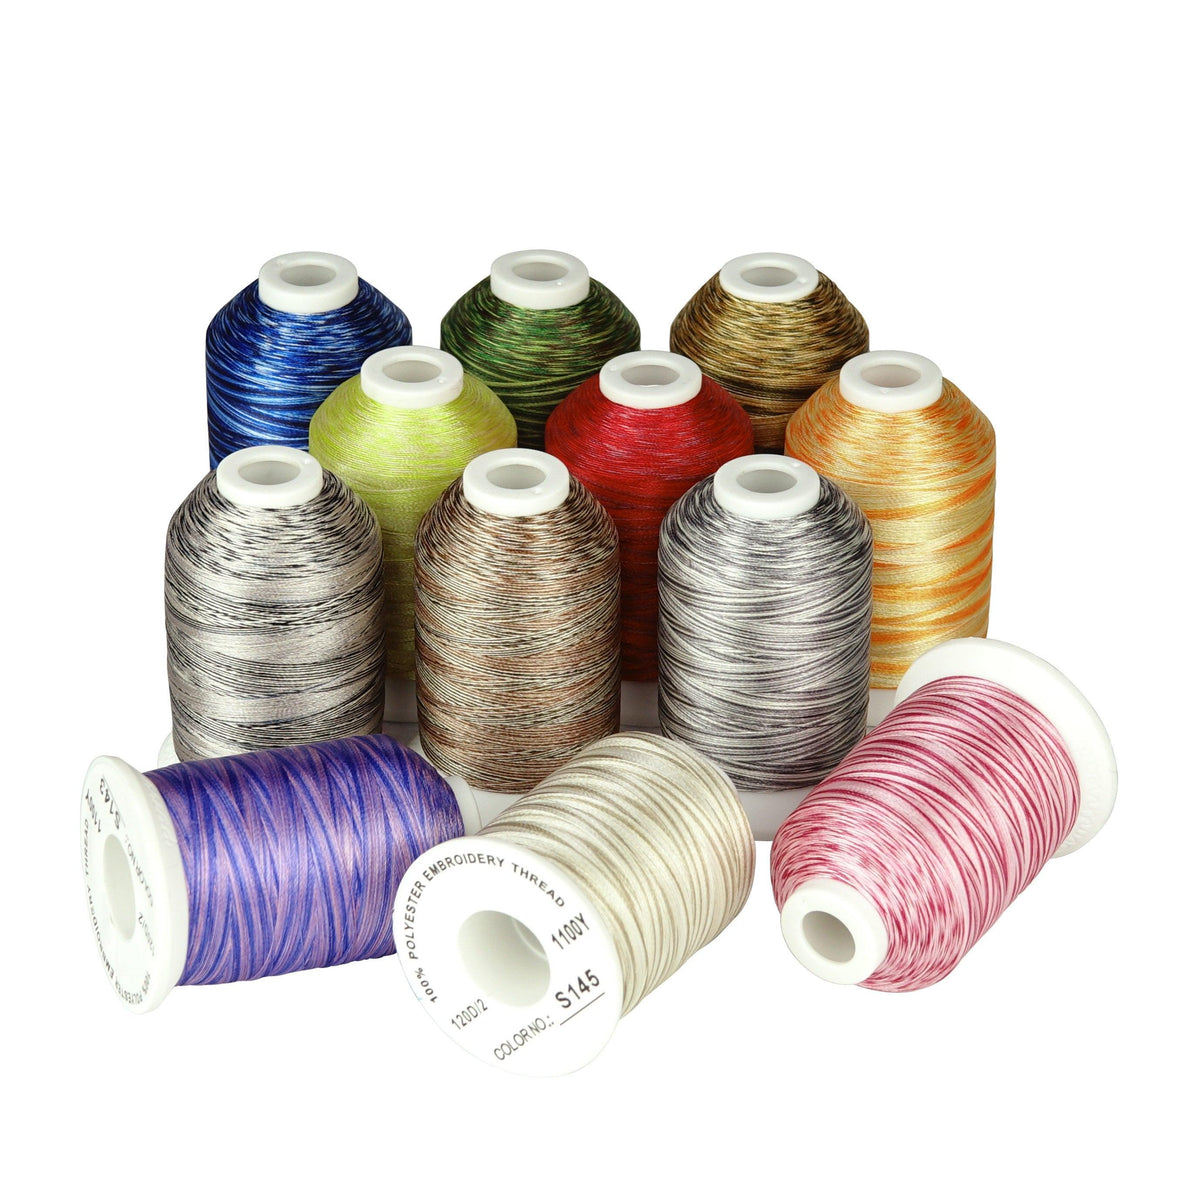 Simthread 12 Colors All Purposes Cotton Quilting Thread for Piecing Sewing  Appliqué Embroidery etc